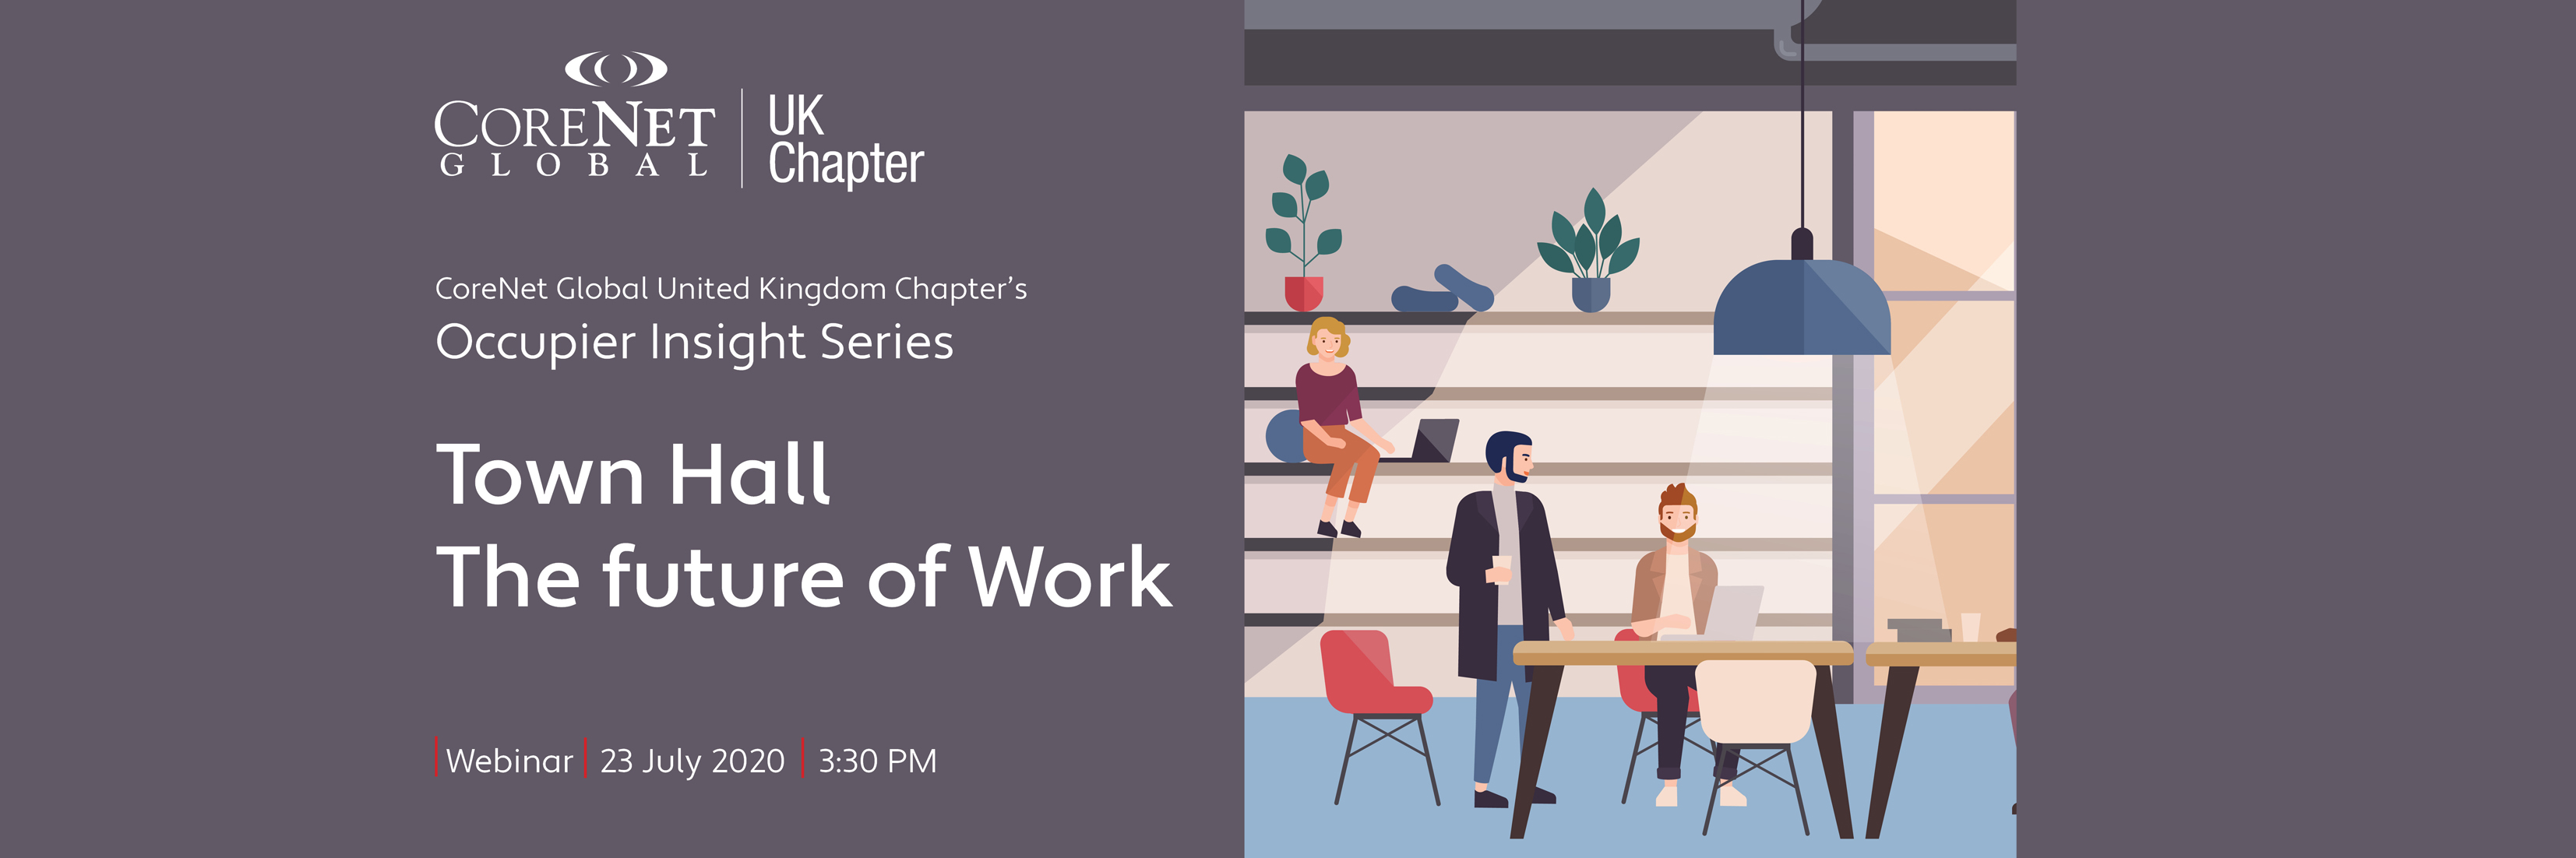 Occupier Insight Series:  The Future of Work 